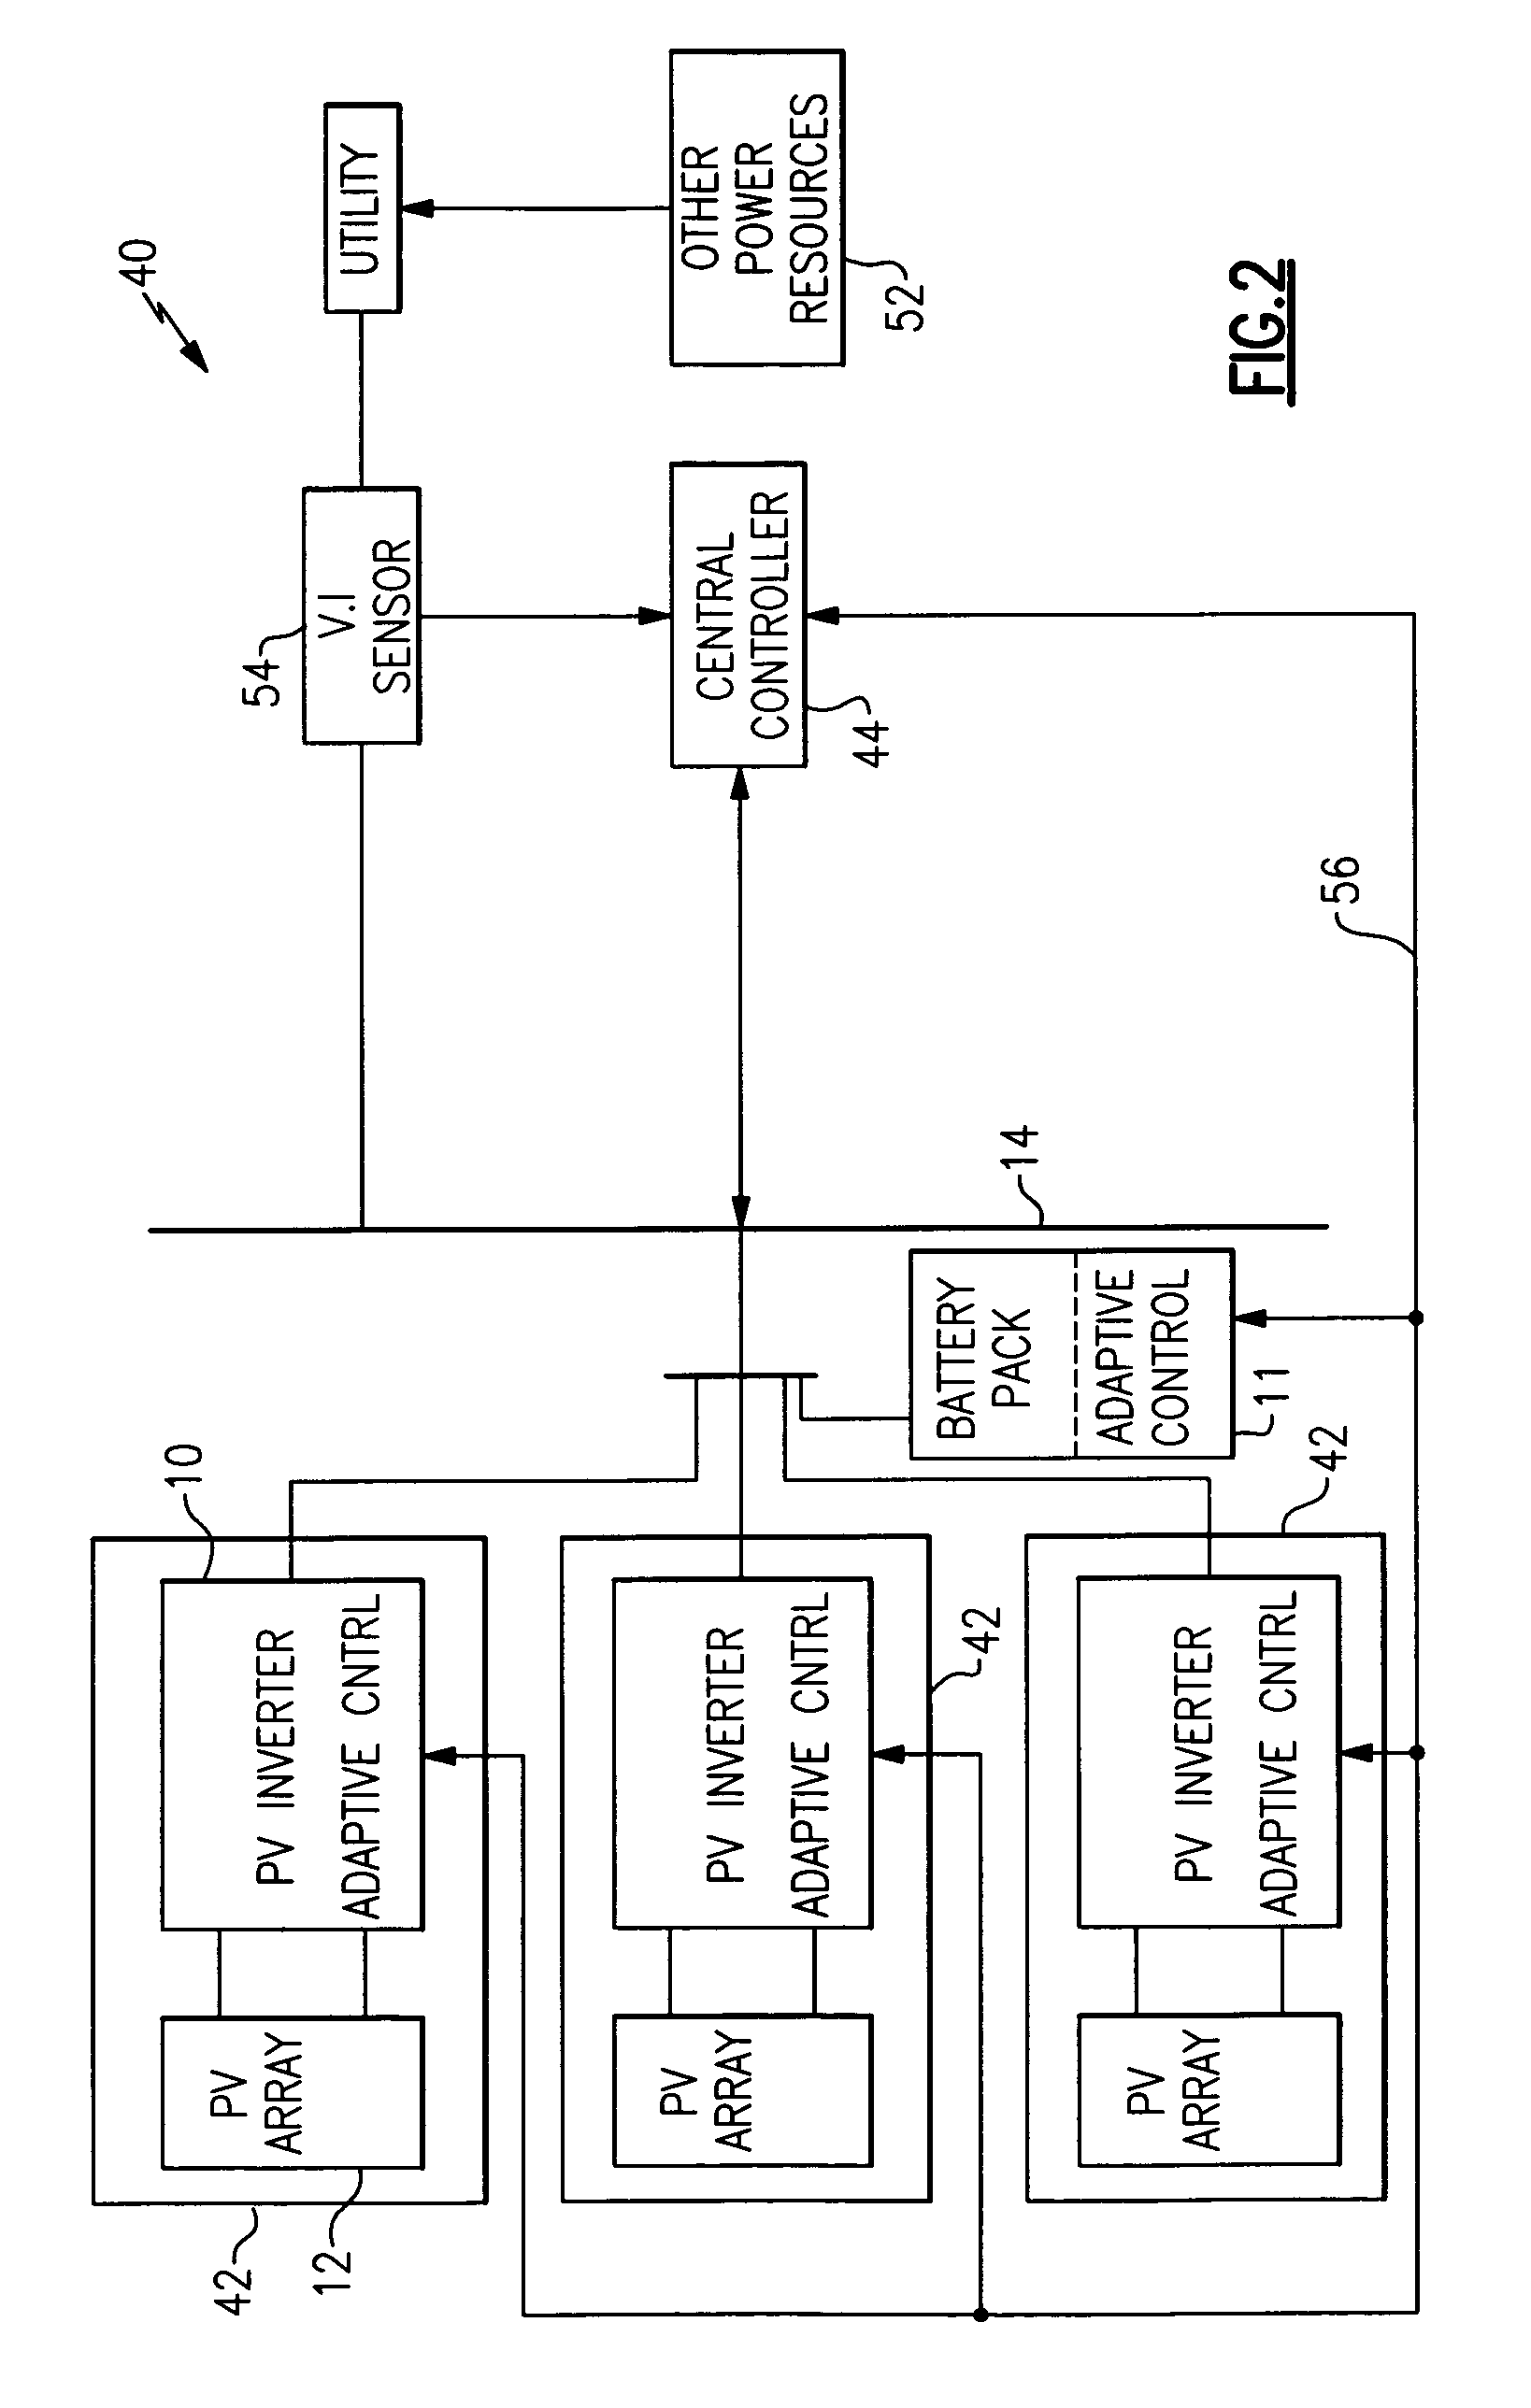 System and method for controlling ramp rate of solar photovoltaic system